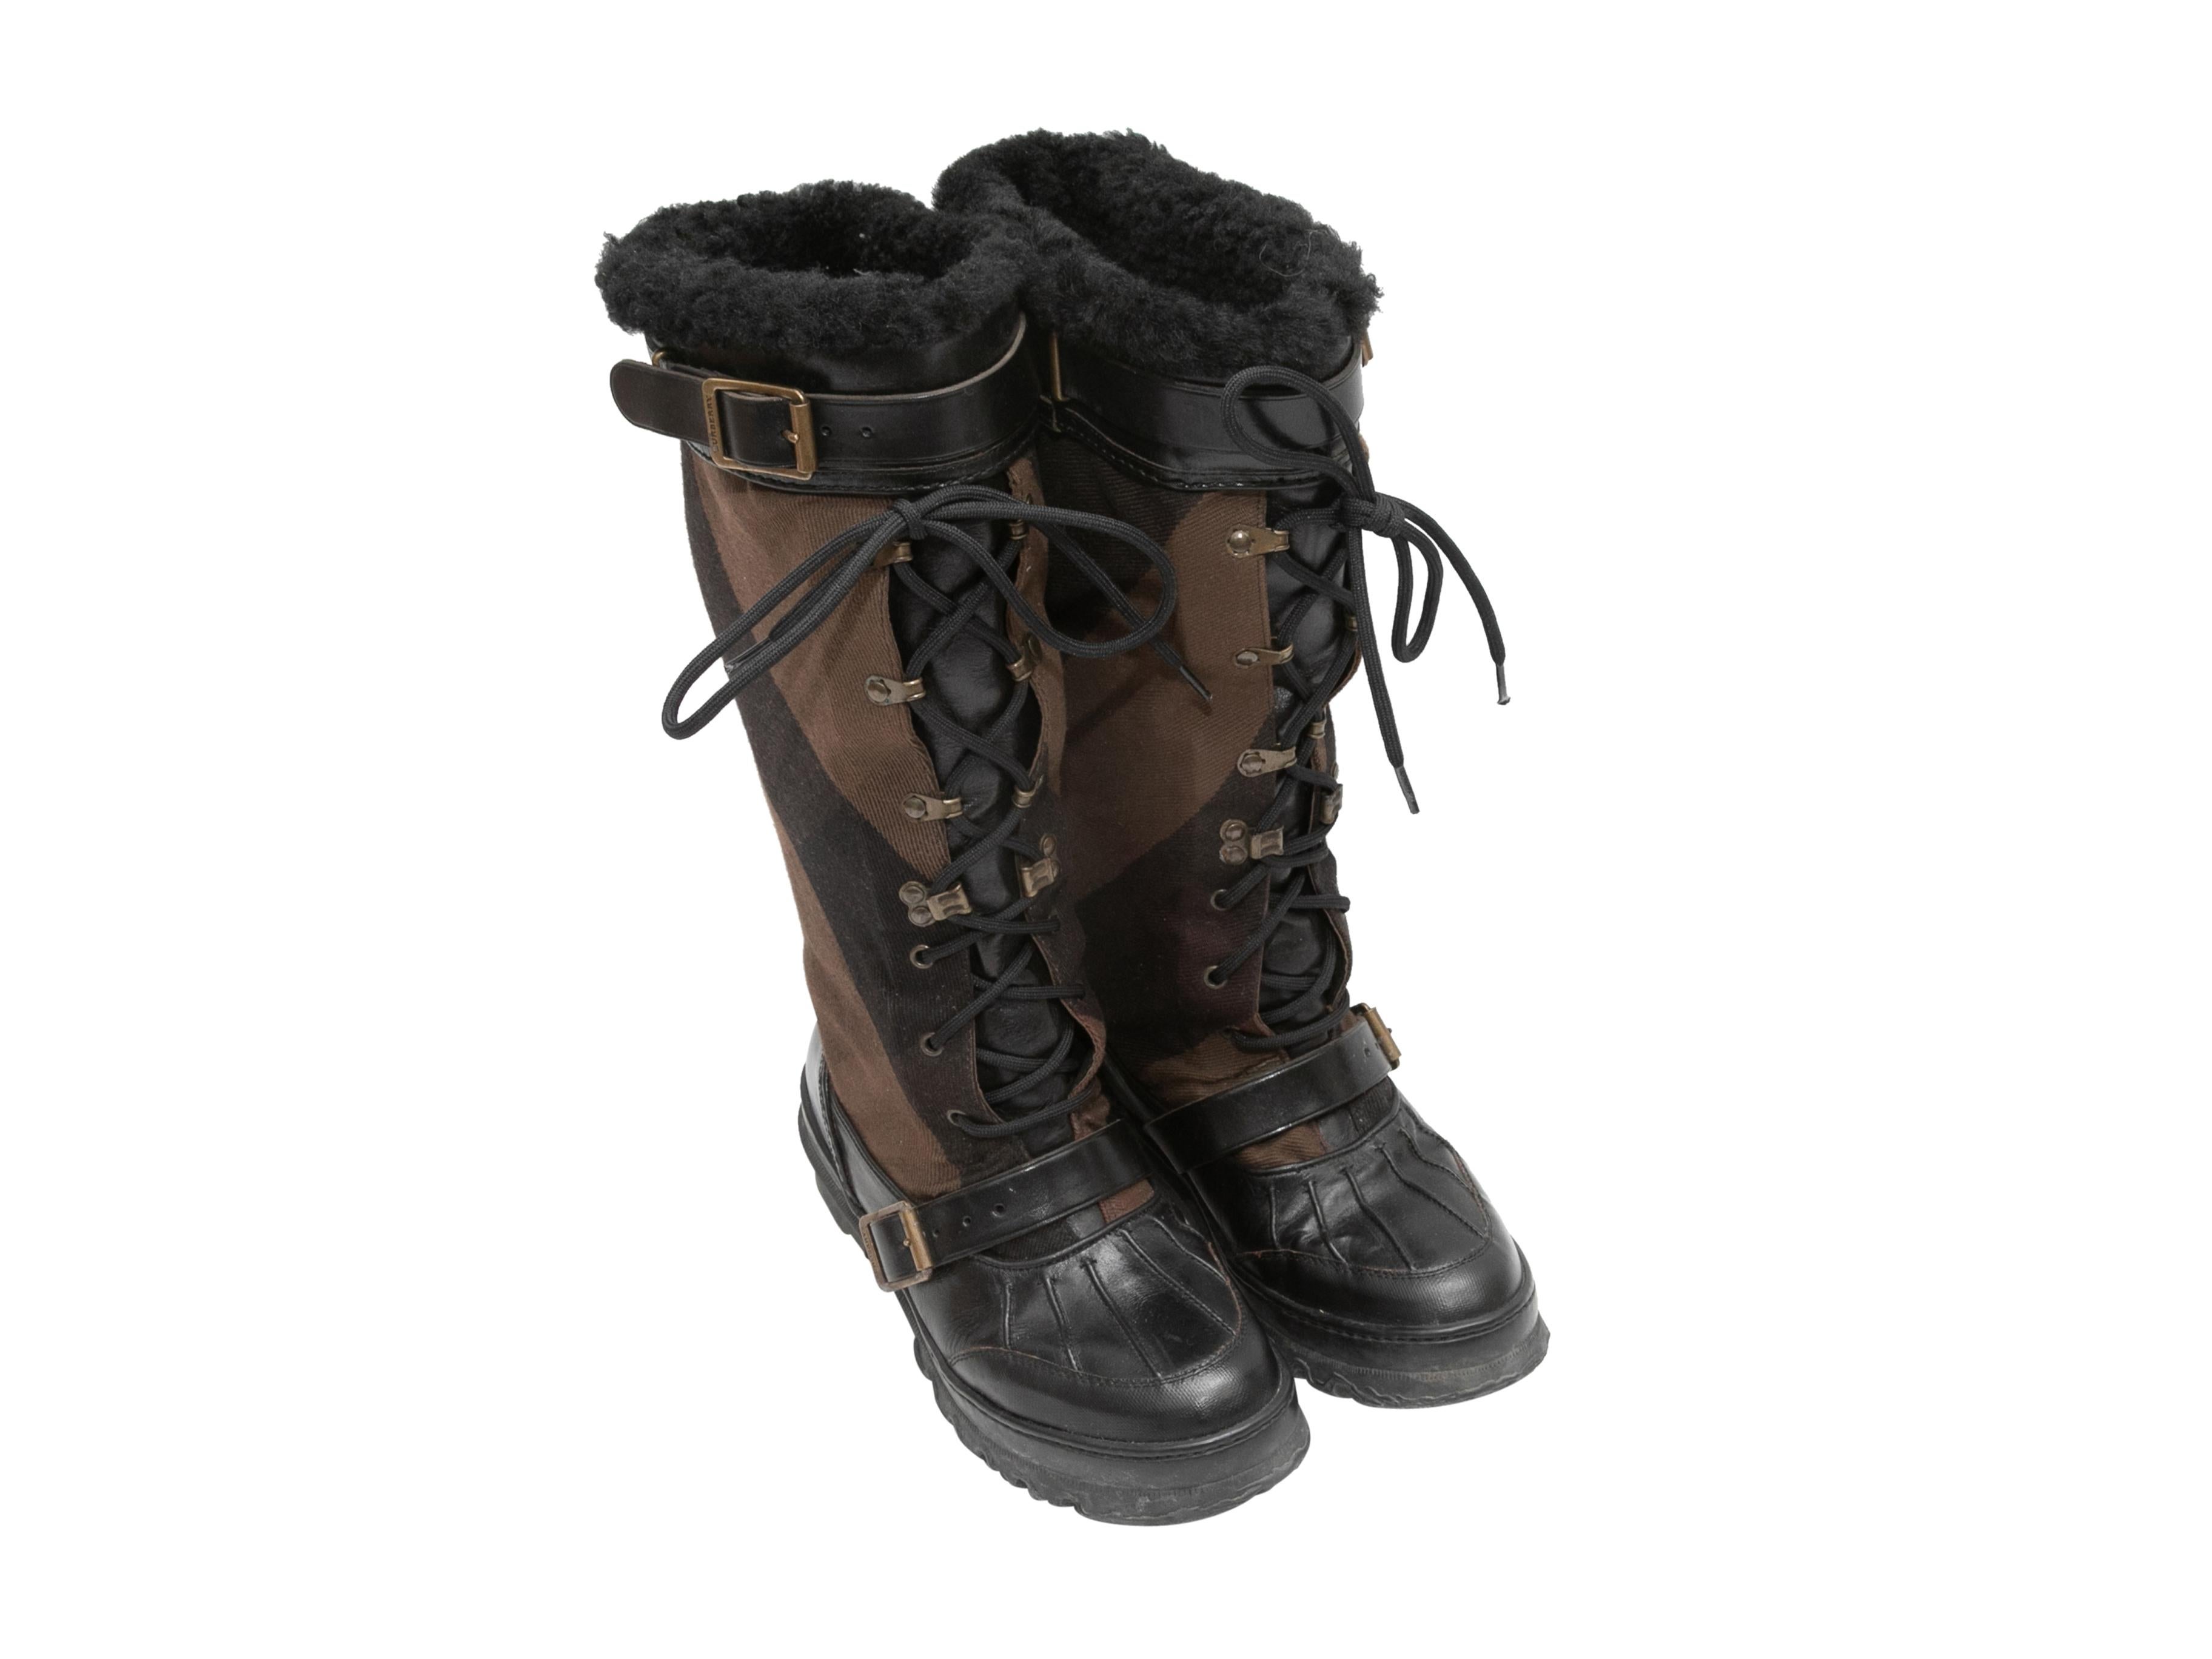 Black and brown shearling-lined Nova Check duck boots by Burberry. Buckle accents. Lace-up tie closures at tops. 13.5